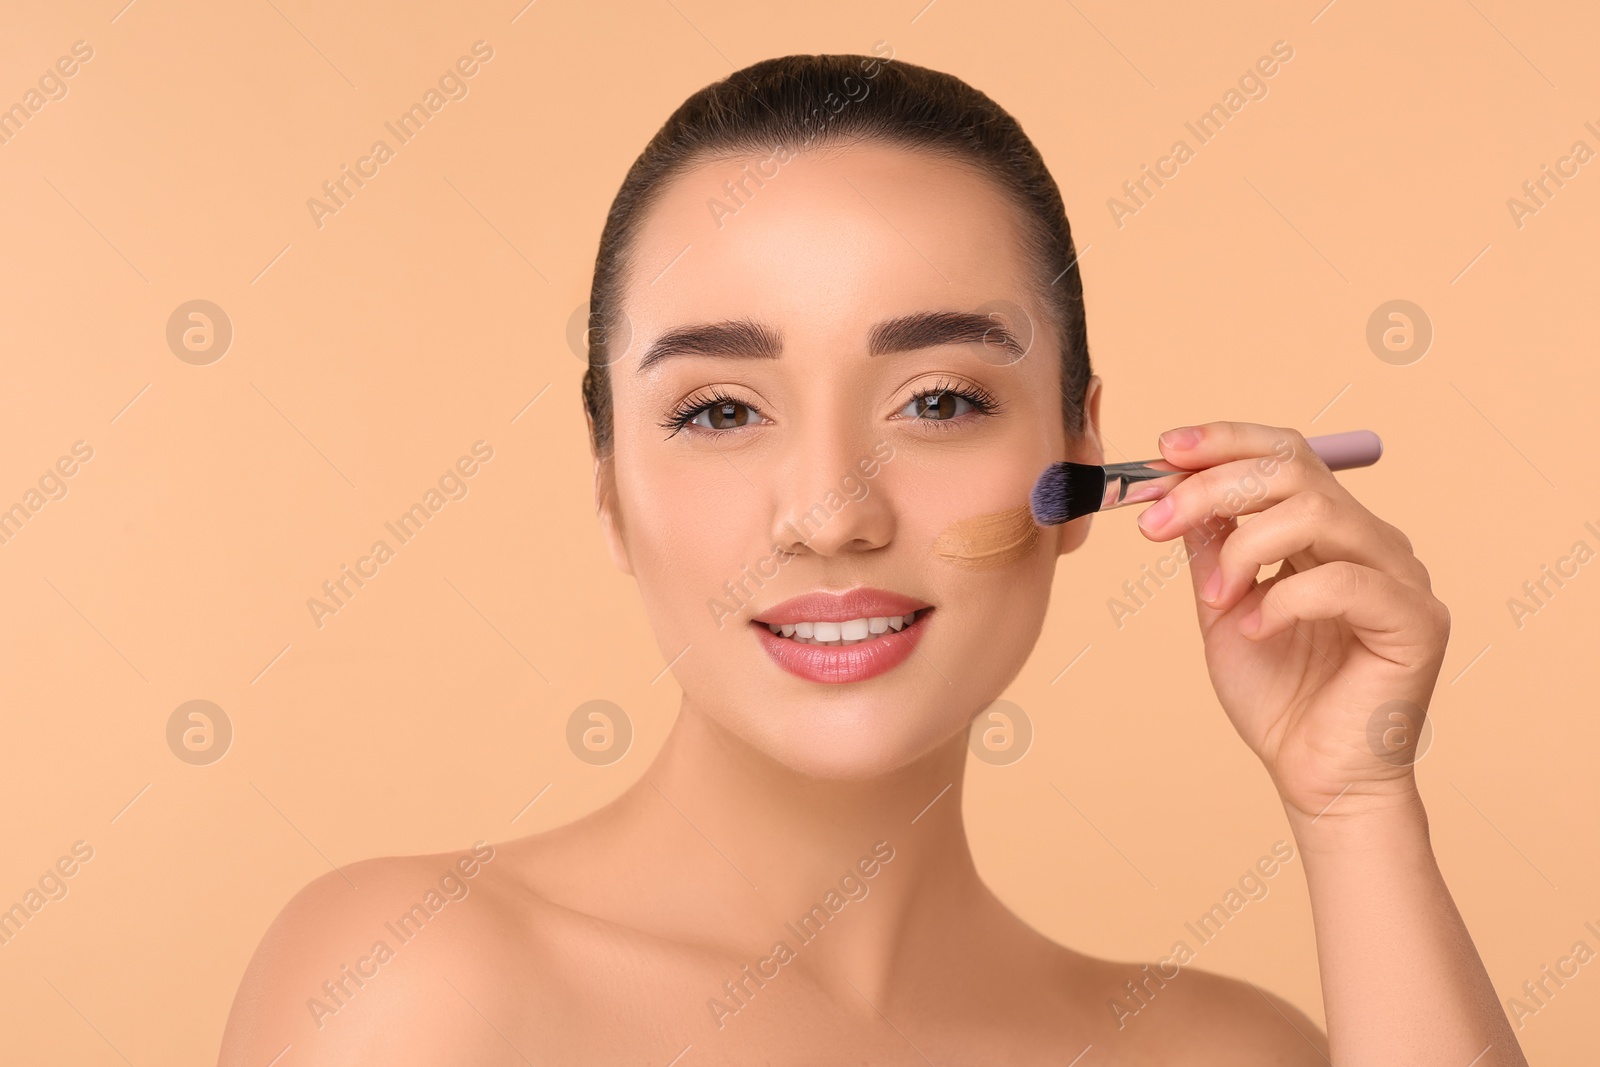 Photo of Woman applying foundation on face with brush against beige background